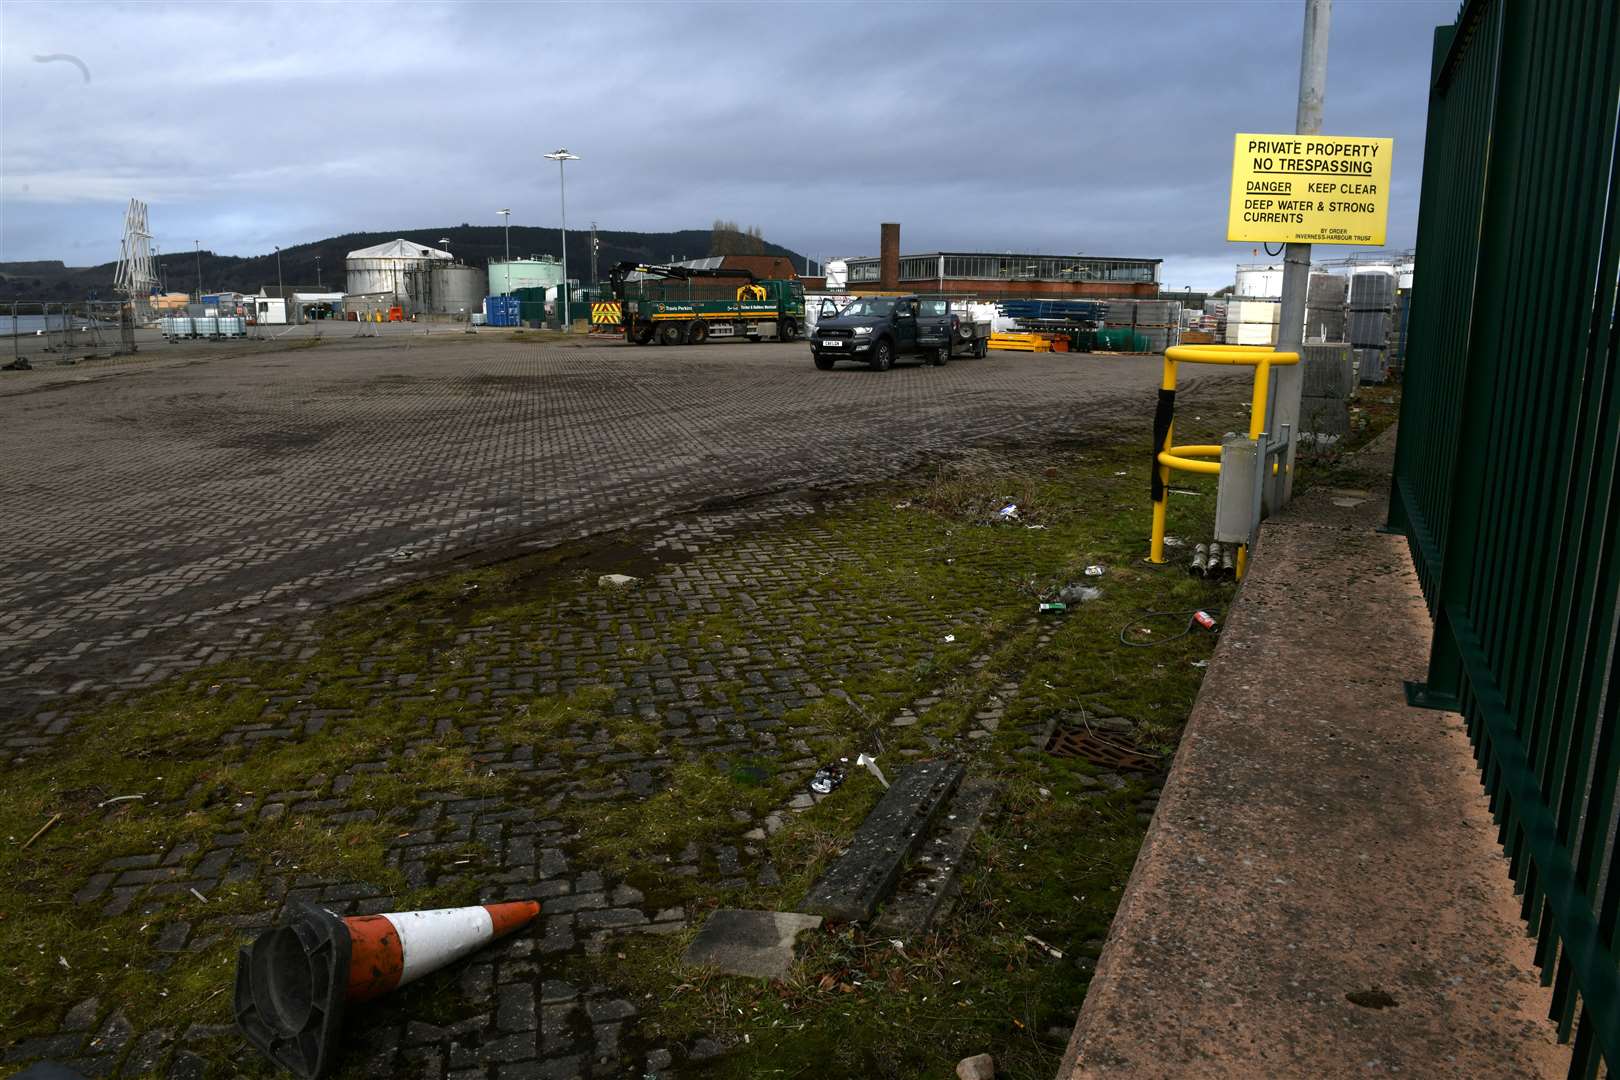 The site for the new electric bus base.